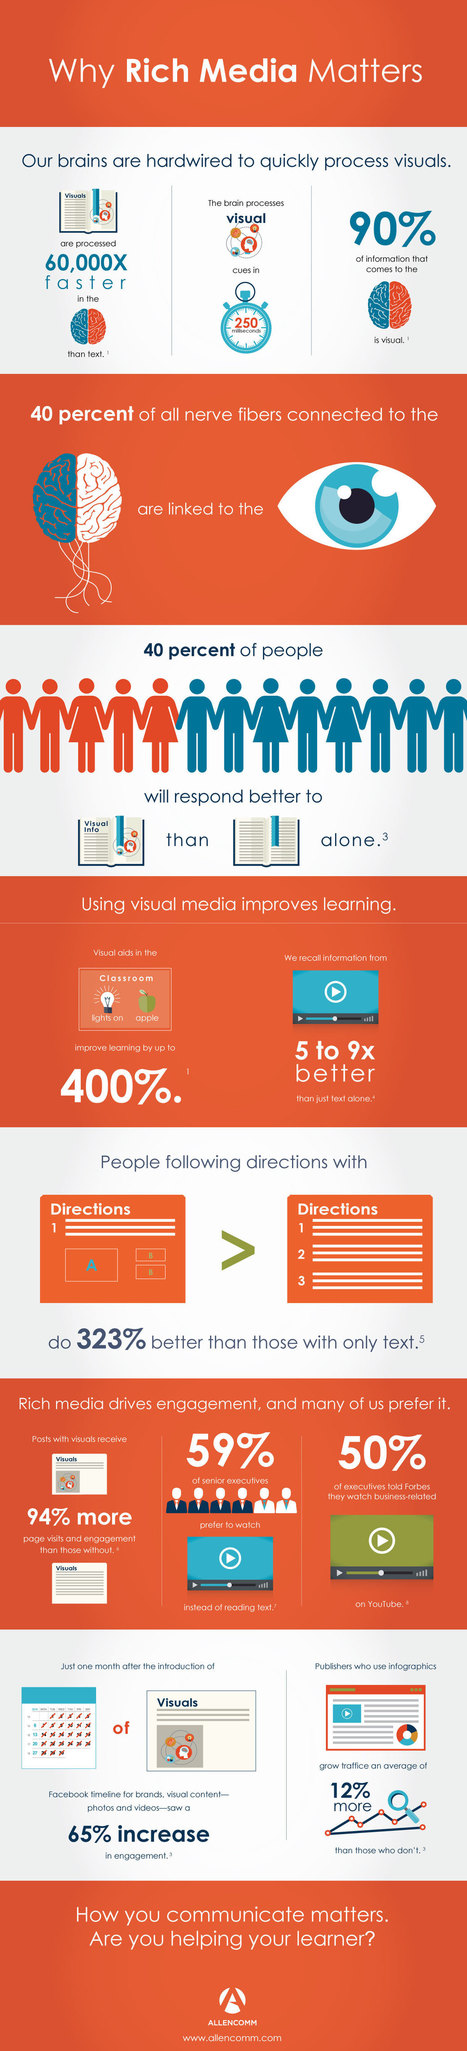 Boosting Learner Engagement with Rich Media Infographic | digital marketing strategy | Scoop.it